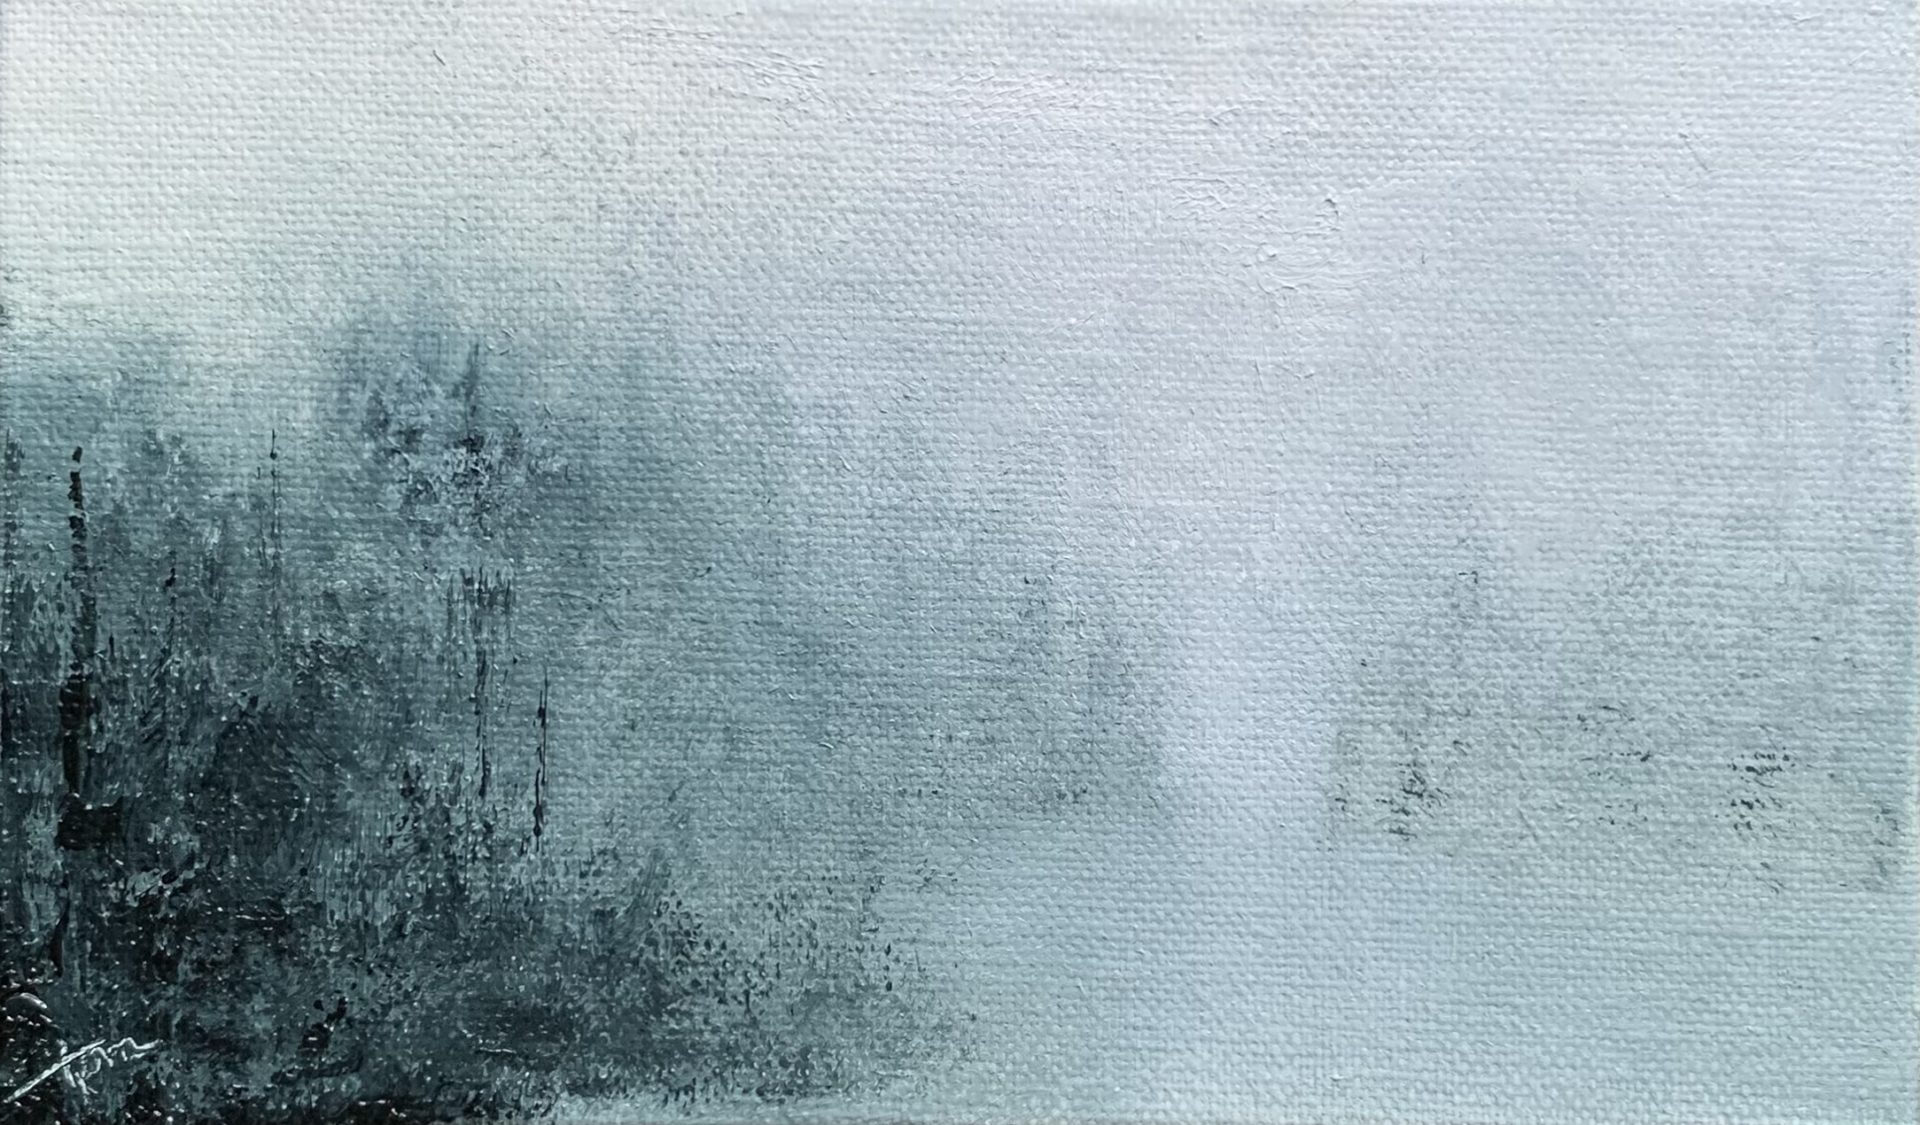 Original oil painting by Tisha Mark, Week 25, 52 Weeks of Finding Light Series, 3"x5" oil on linen panel (2023). Tiny landscape painting in a limited palette of soft cool gray-blue tones, featuring an atmospheric foggy scene of trees surrounding a body of water that fades into the distance.